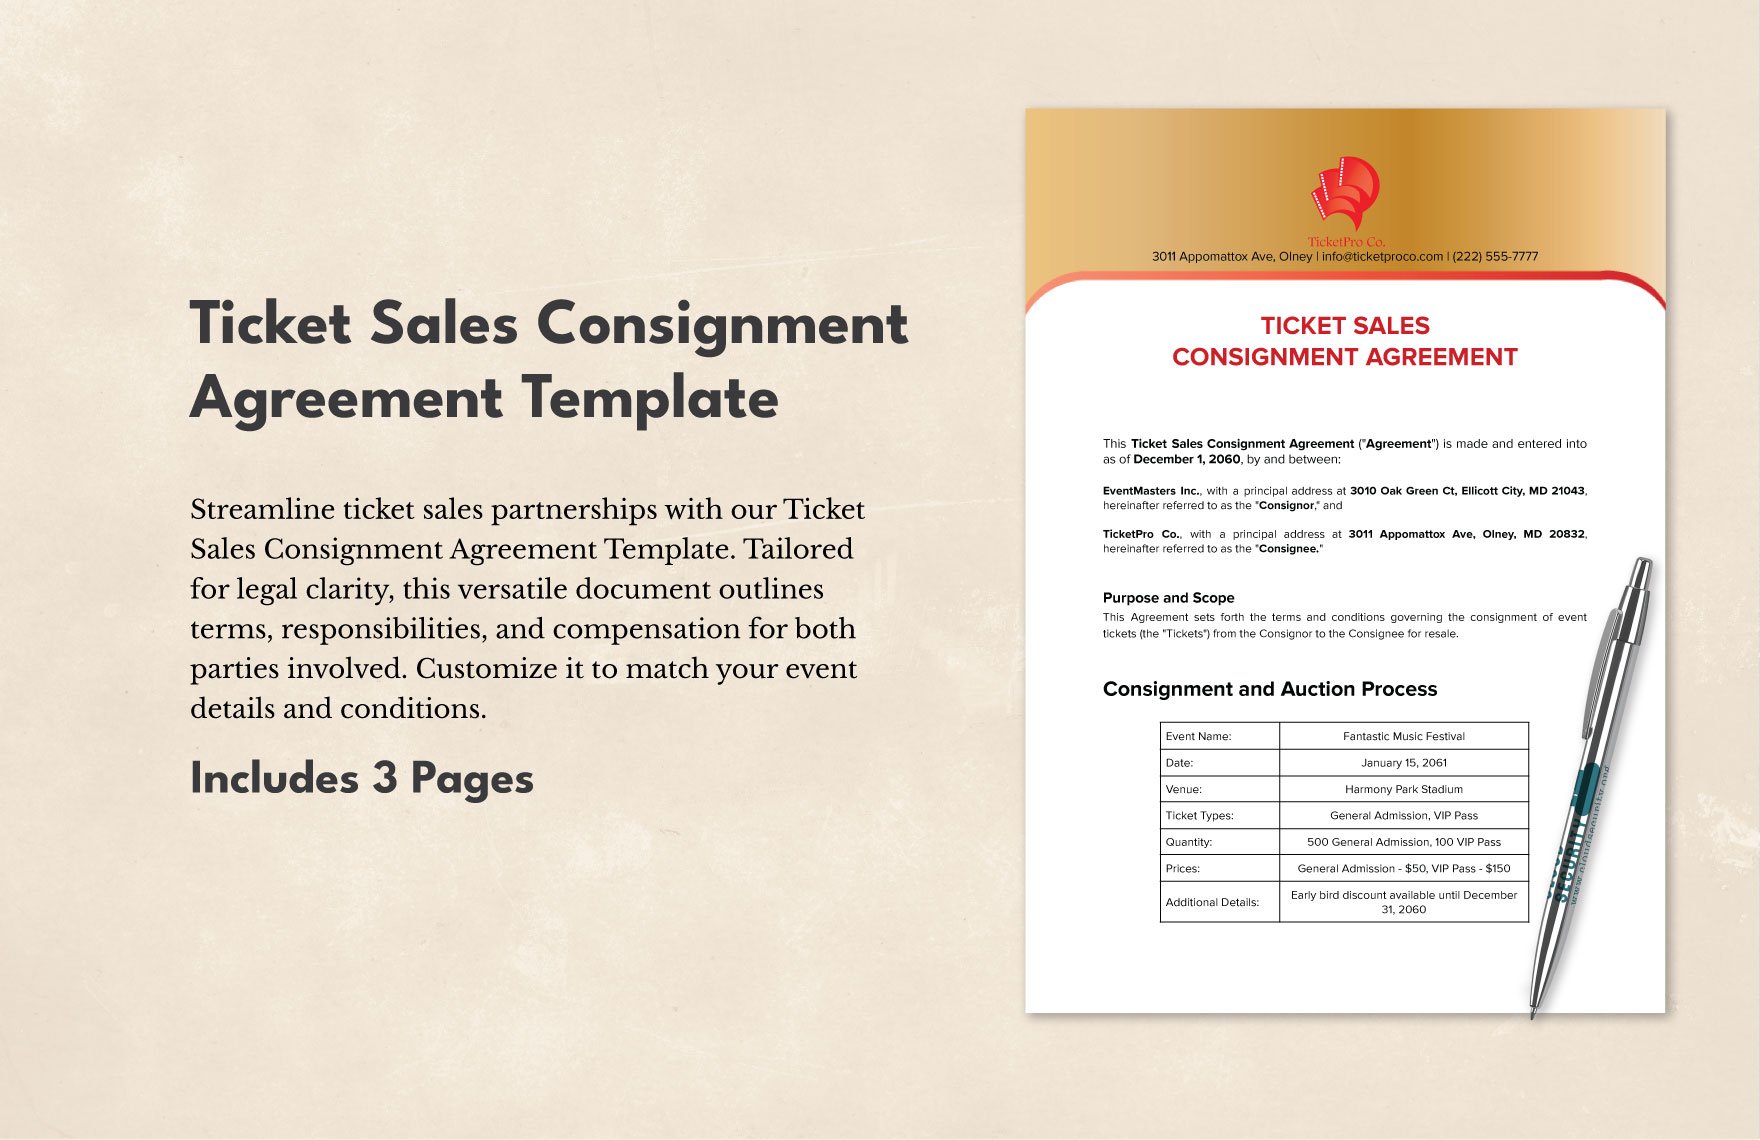 Ticket Sales Consignment Agreement Template in Word, Google Docs, PDF